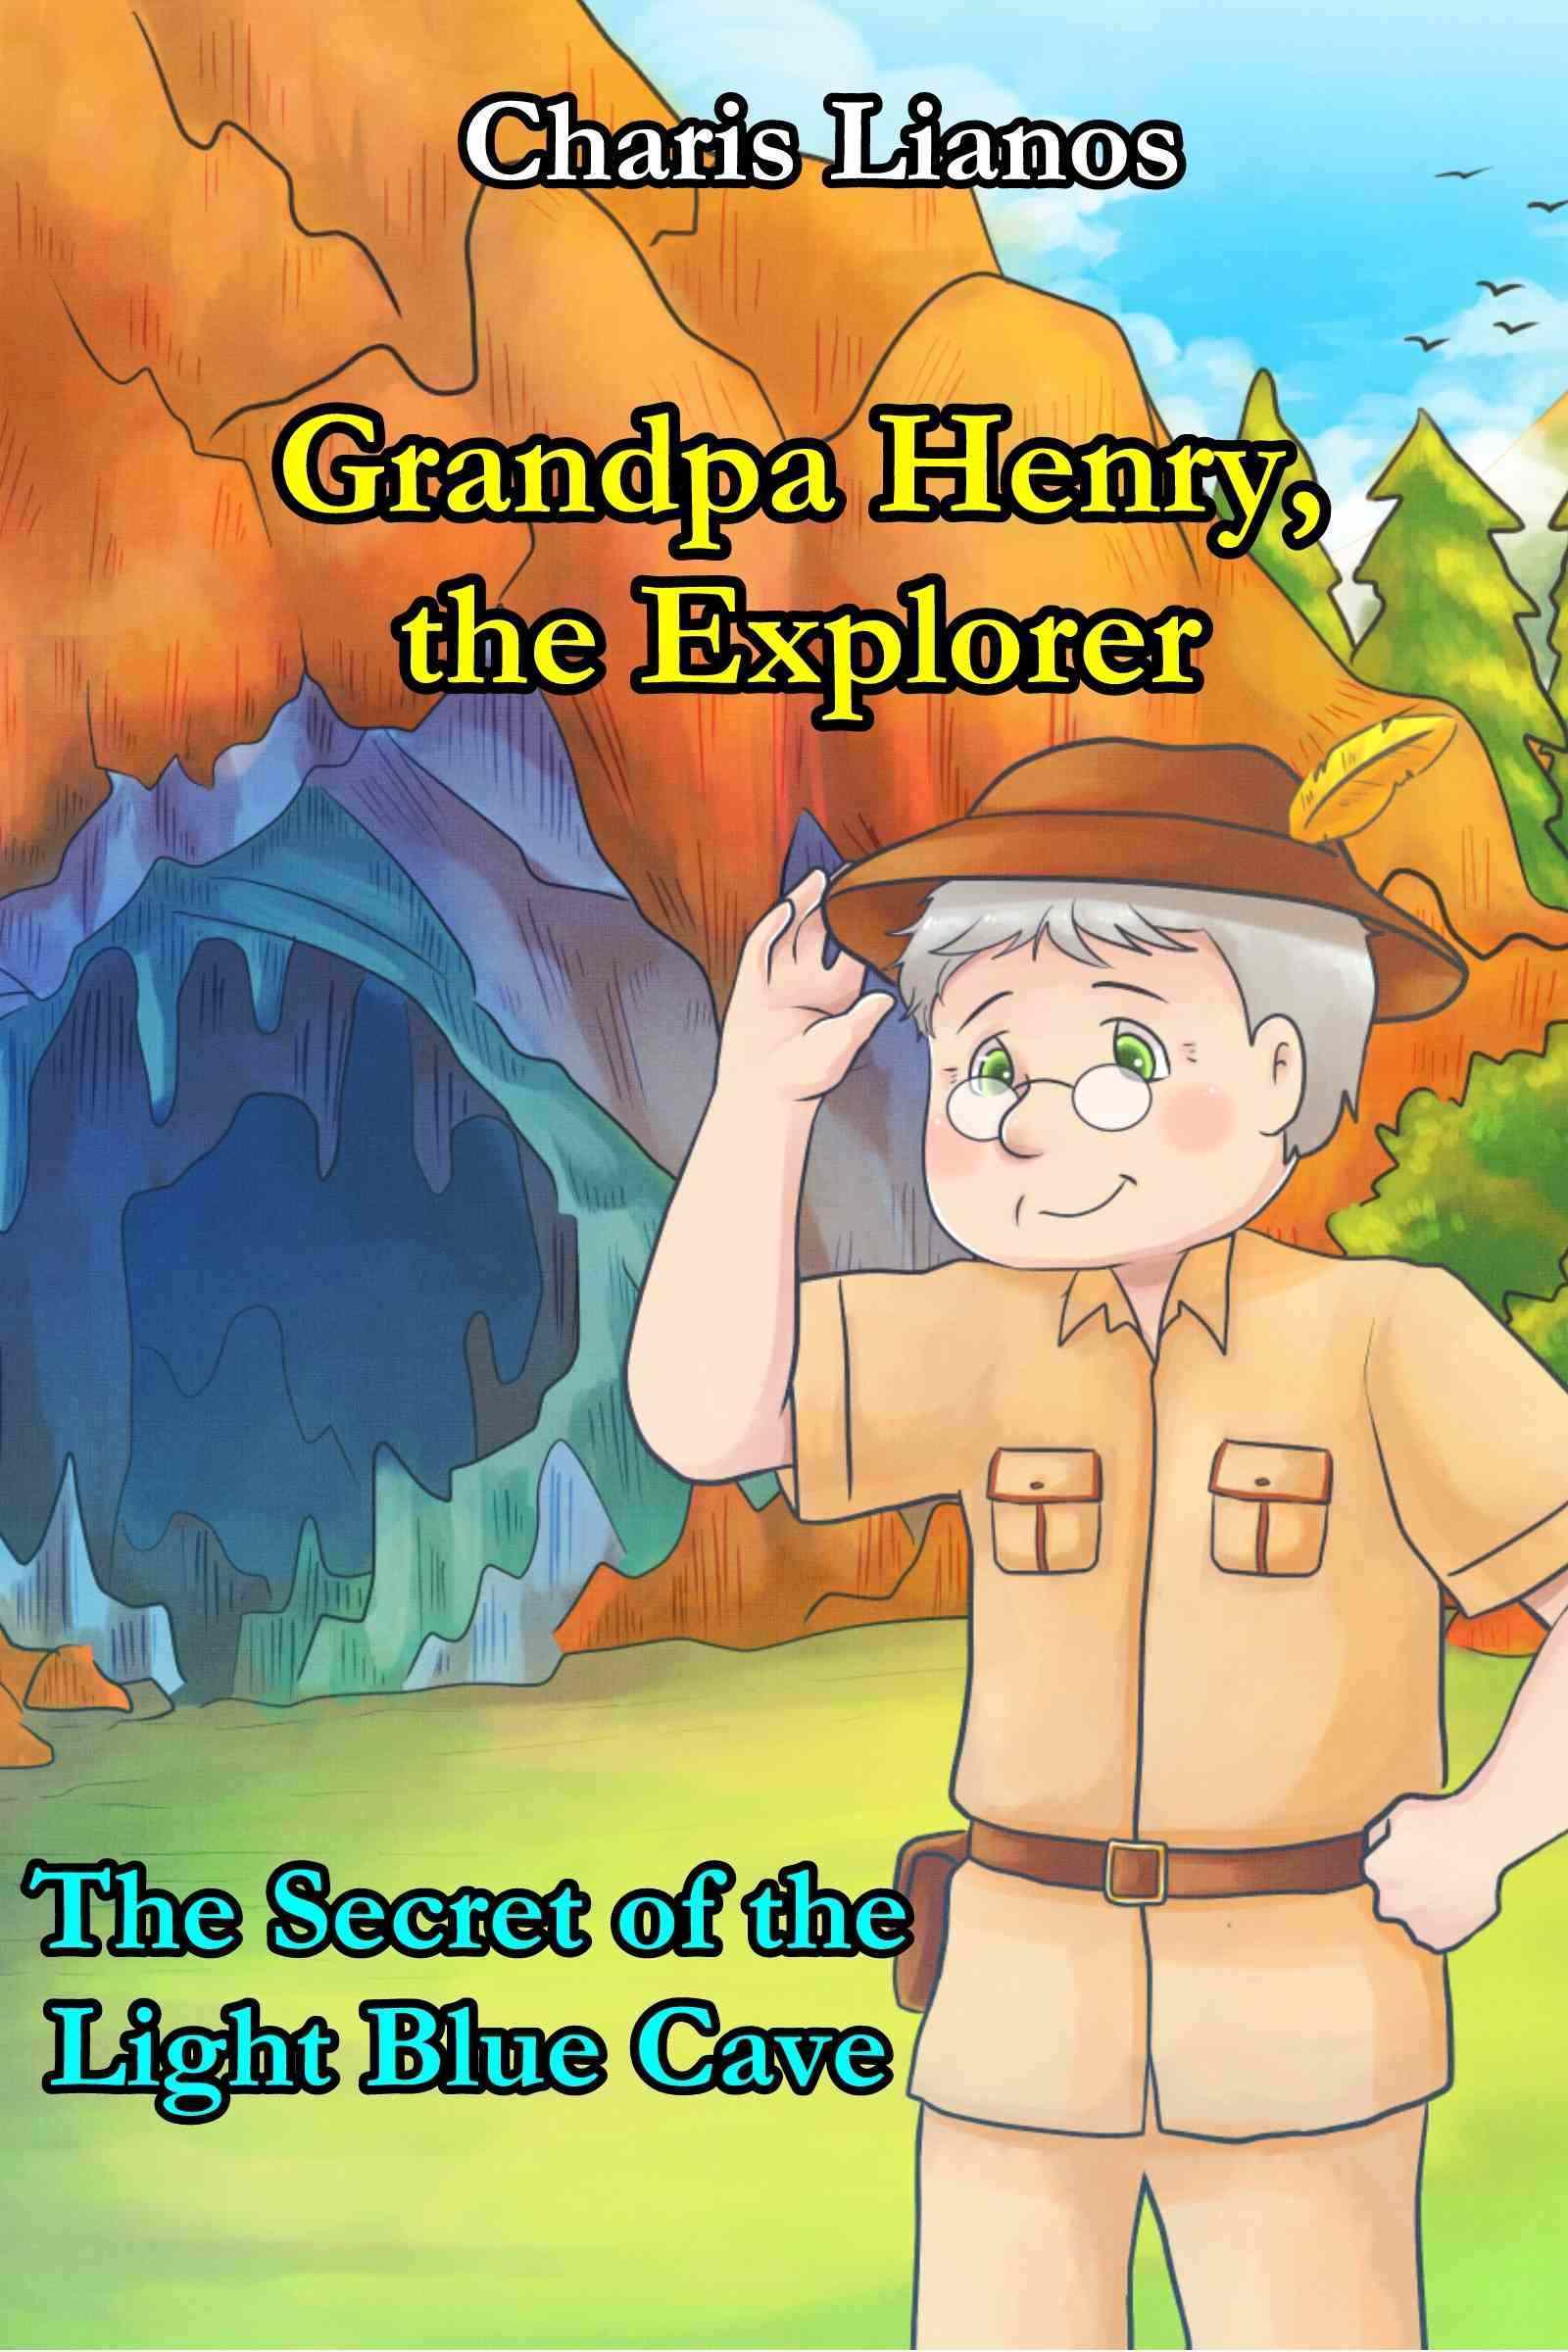 FREE: Grandpa Henry, the Explorer: The Secret of the Light Blue Cave by Charis Lianos